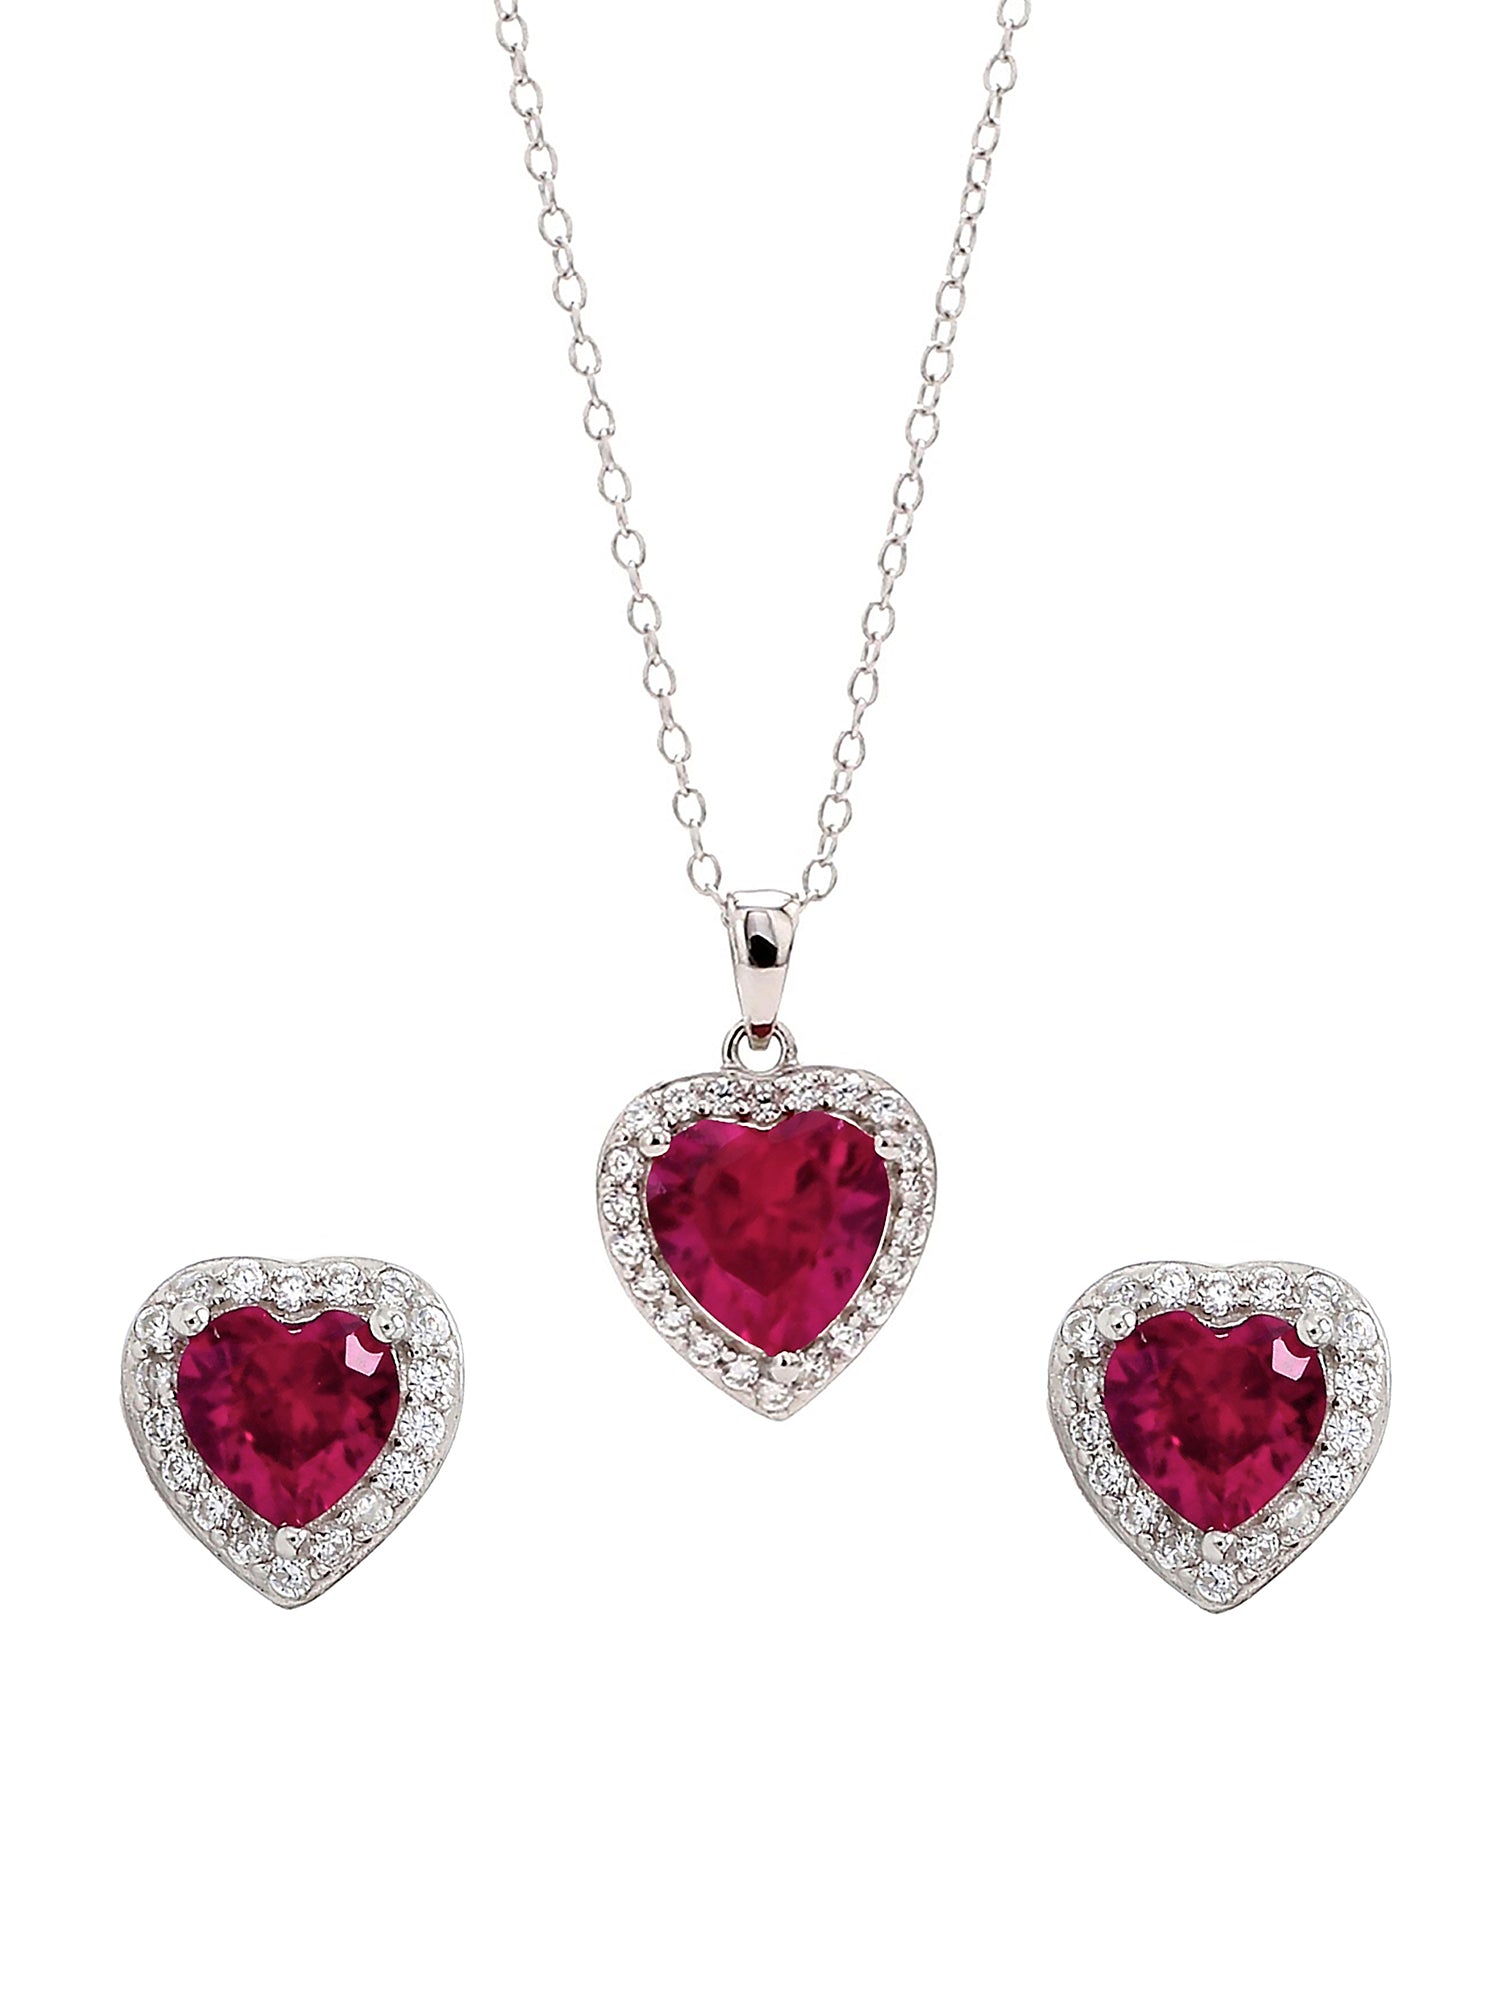 SILVER HEART SHAPED RUBY PENDANT AND EARRINGS